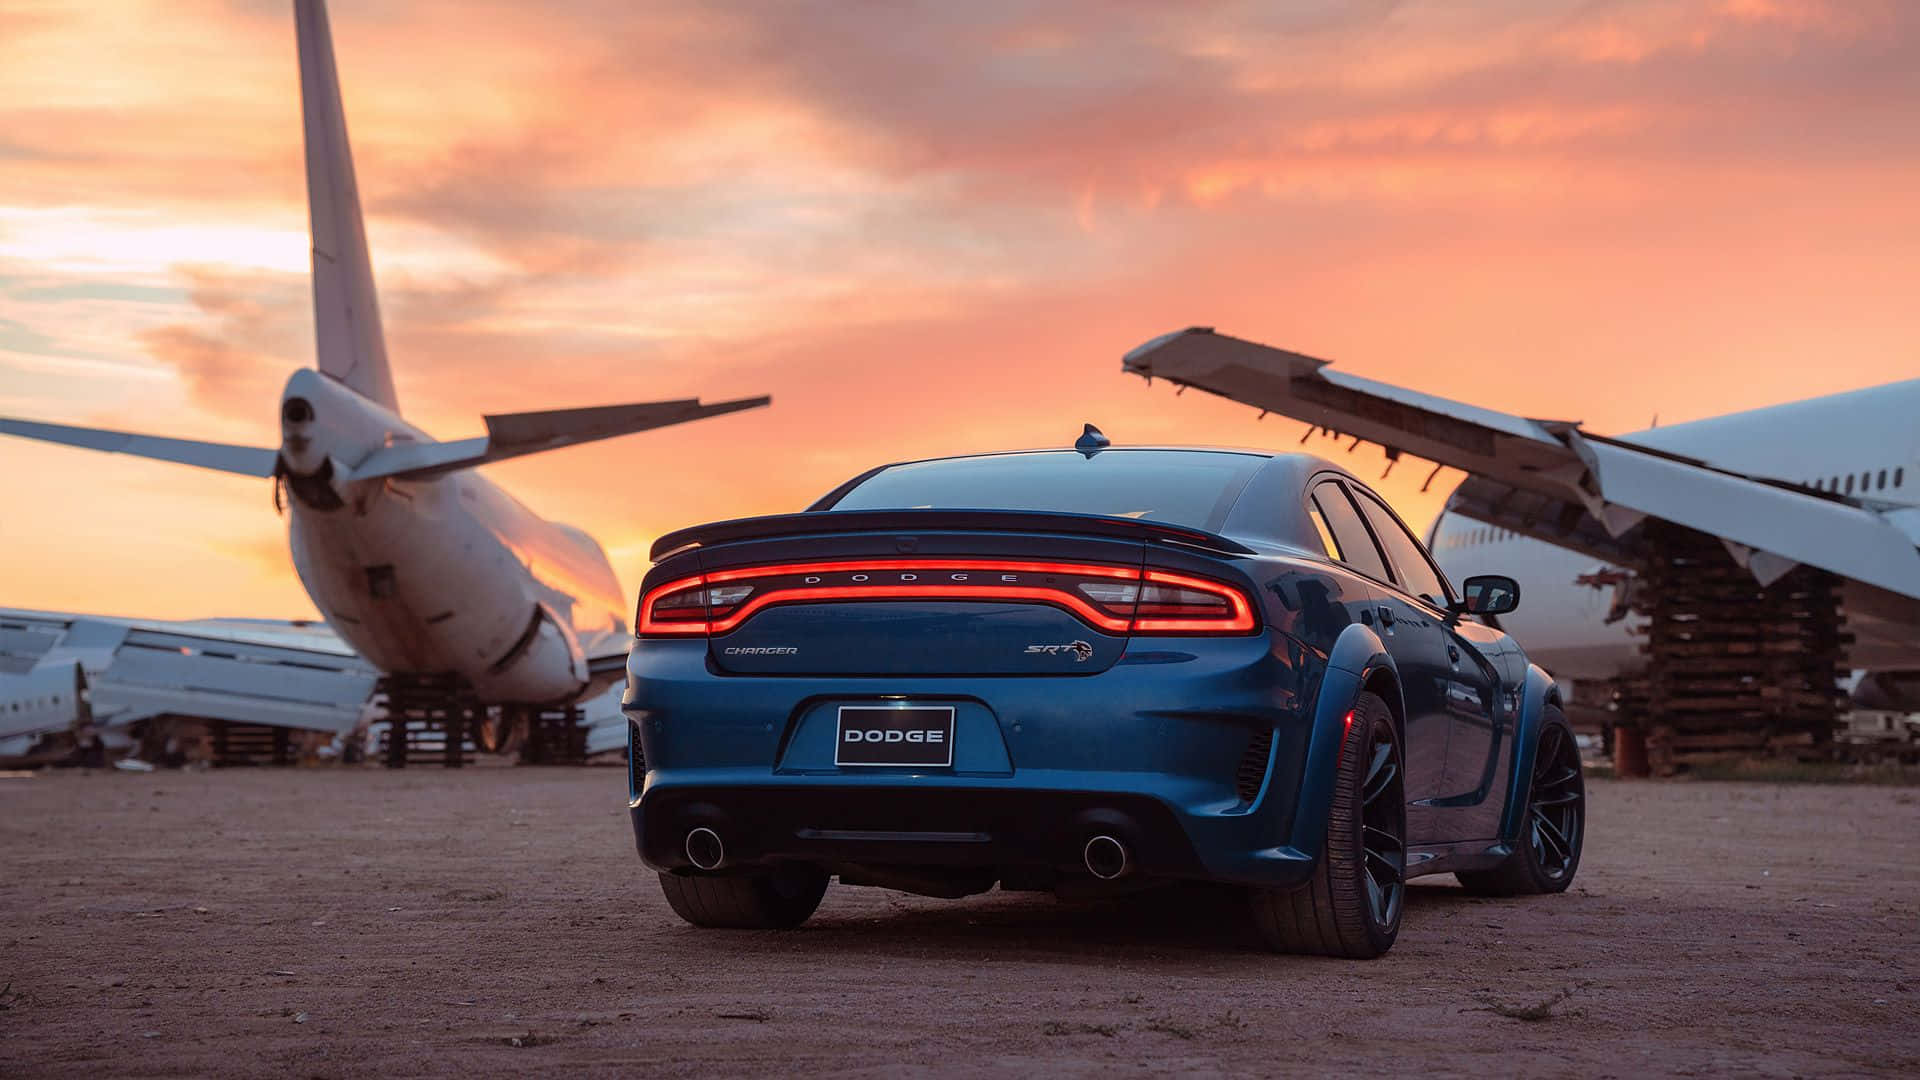 Power and Style - Dodge Charger on the Road Wallpaper